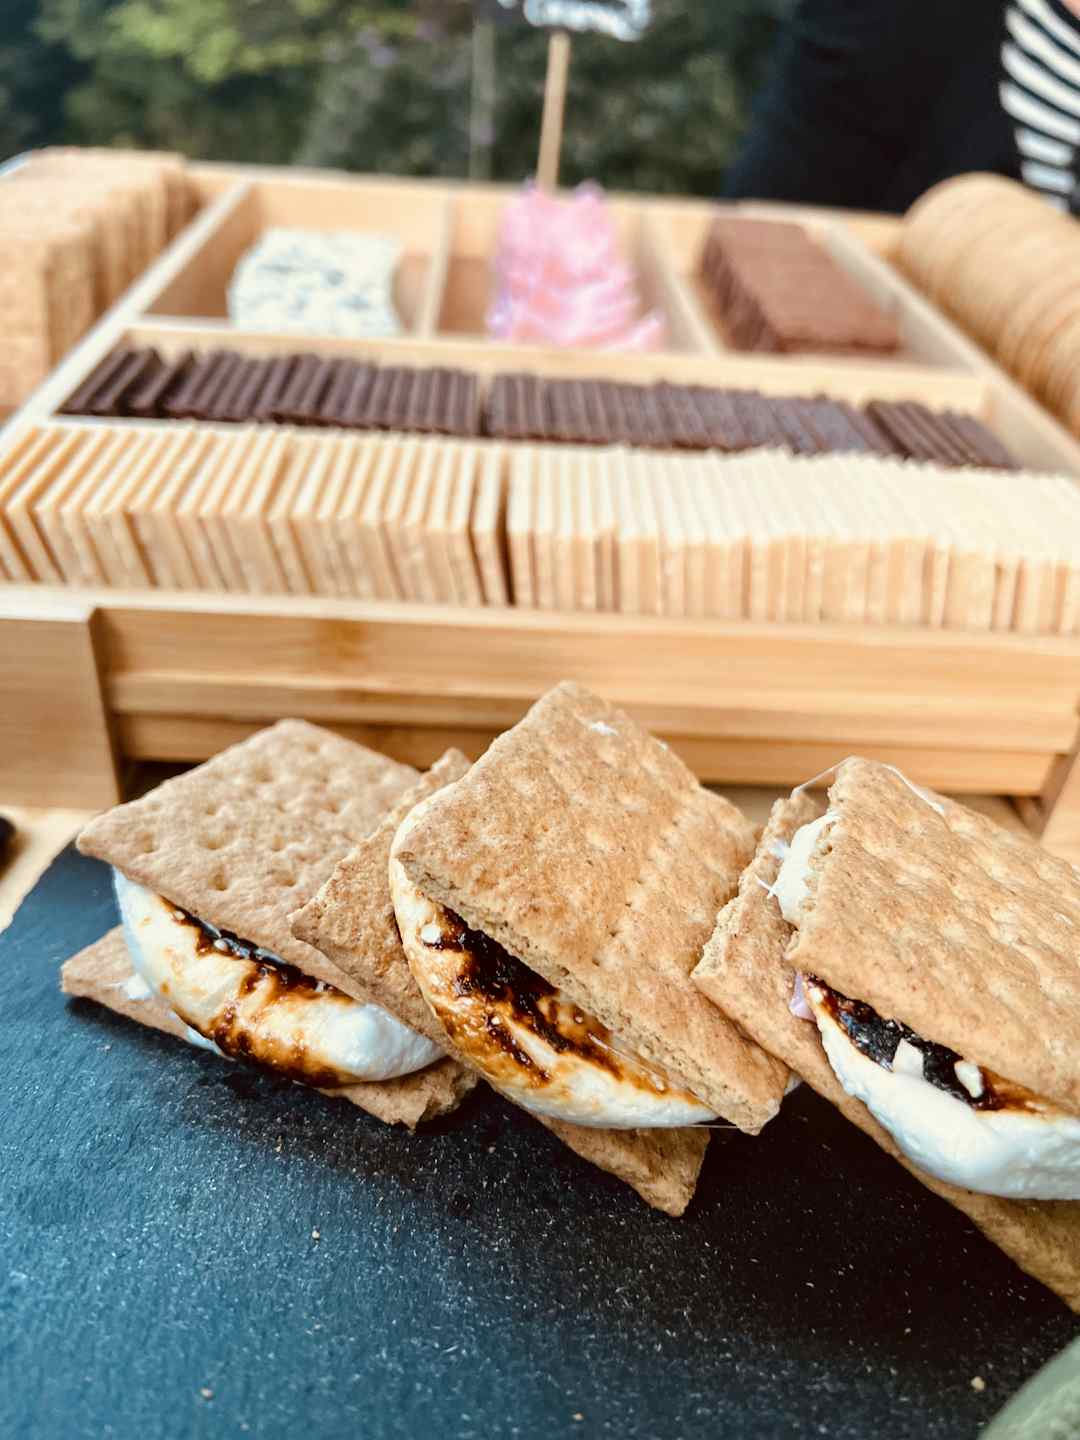 Hero image for supplier S’mores Station 